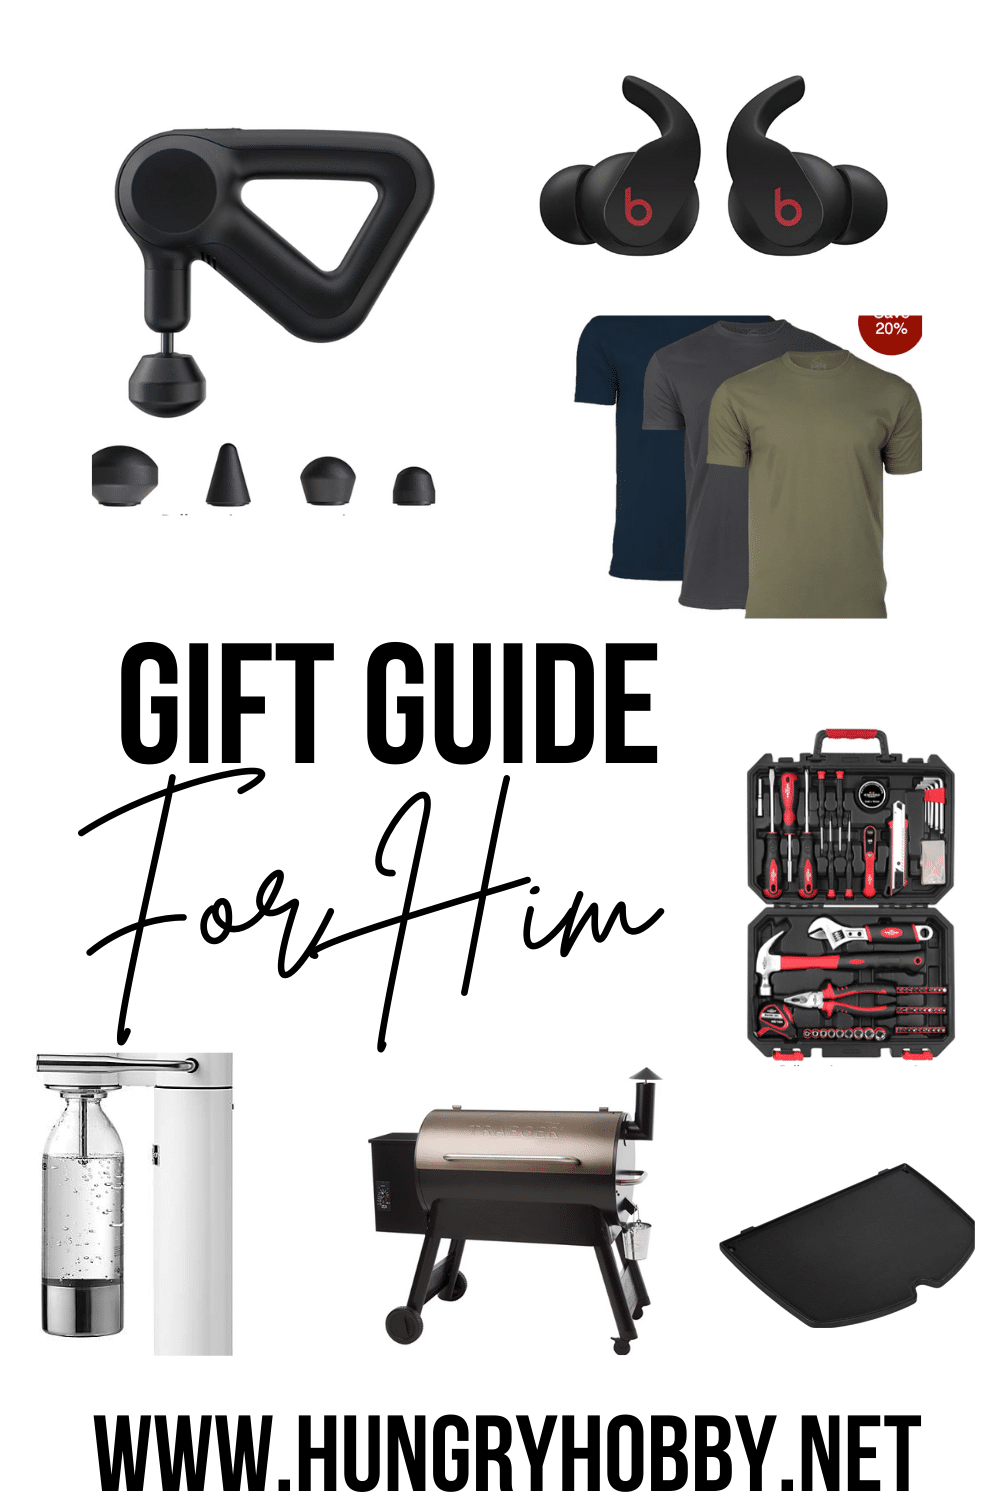 2023 HH Preschooler Gift Guide - Hungry Hobby